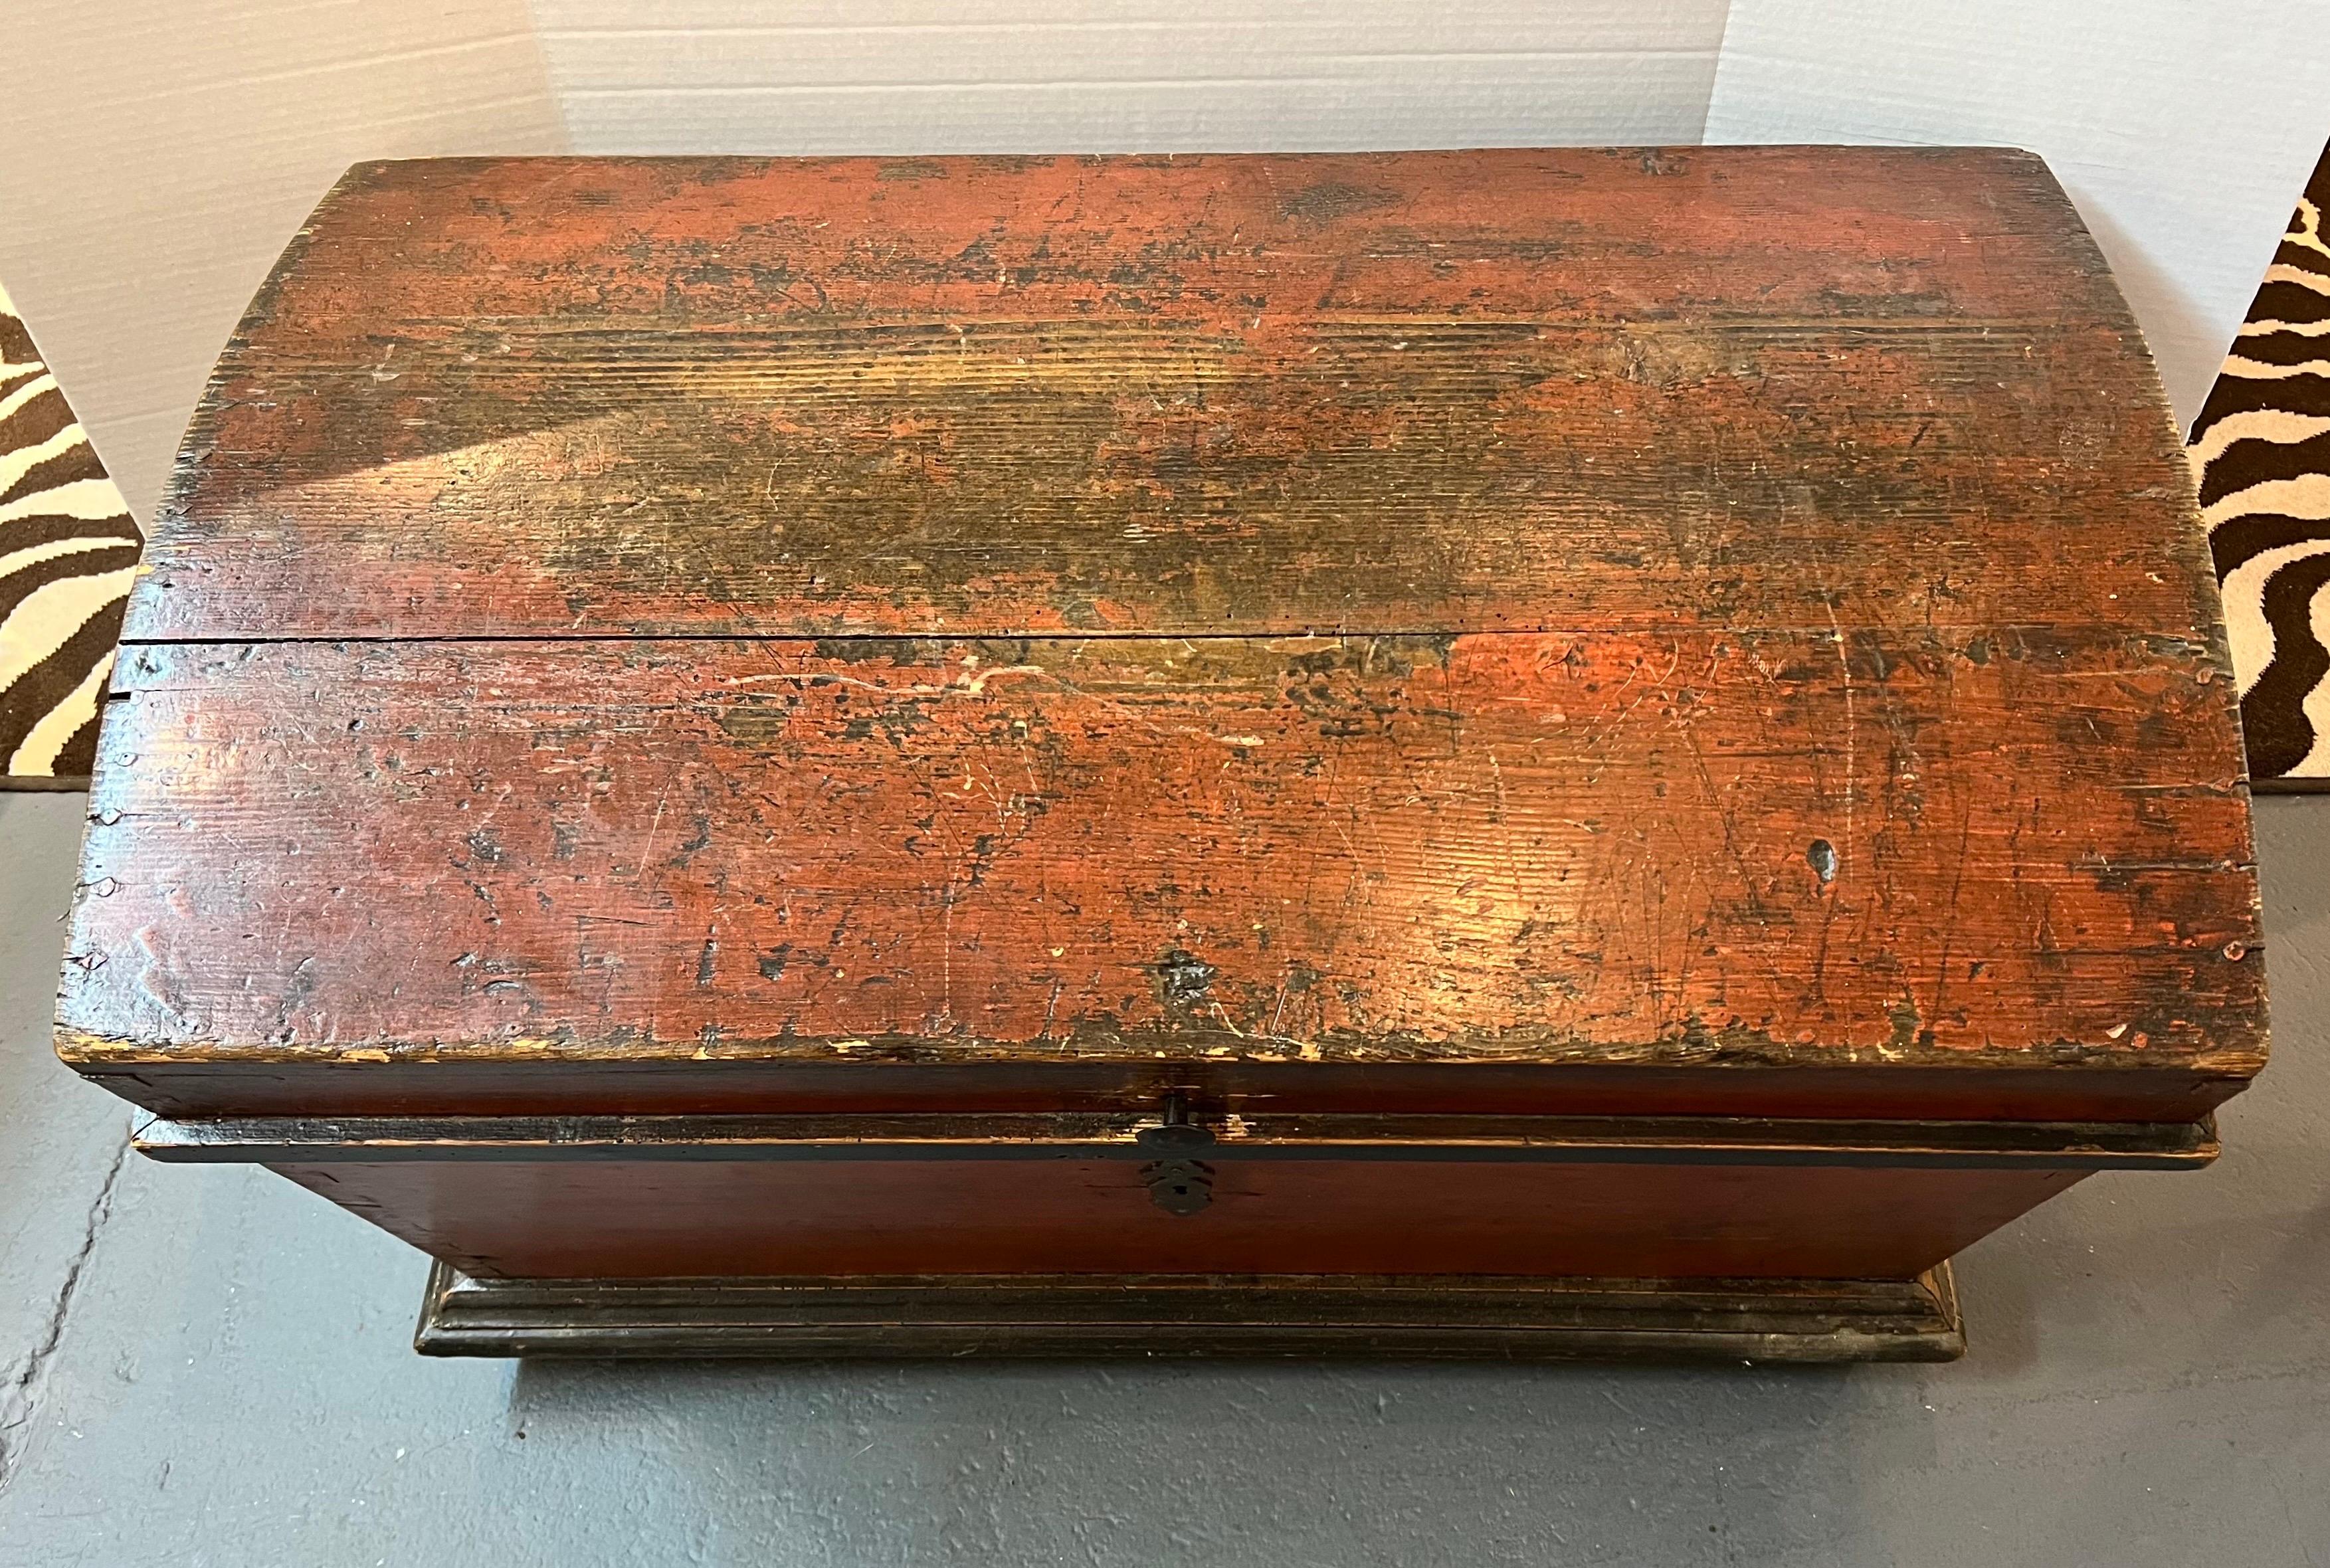 Rare antique Seaman's chest with gorgeous patina. Features iron work handles.
A conversation piece. Why not own the best?.